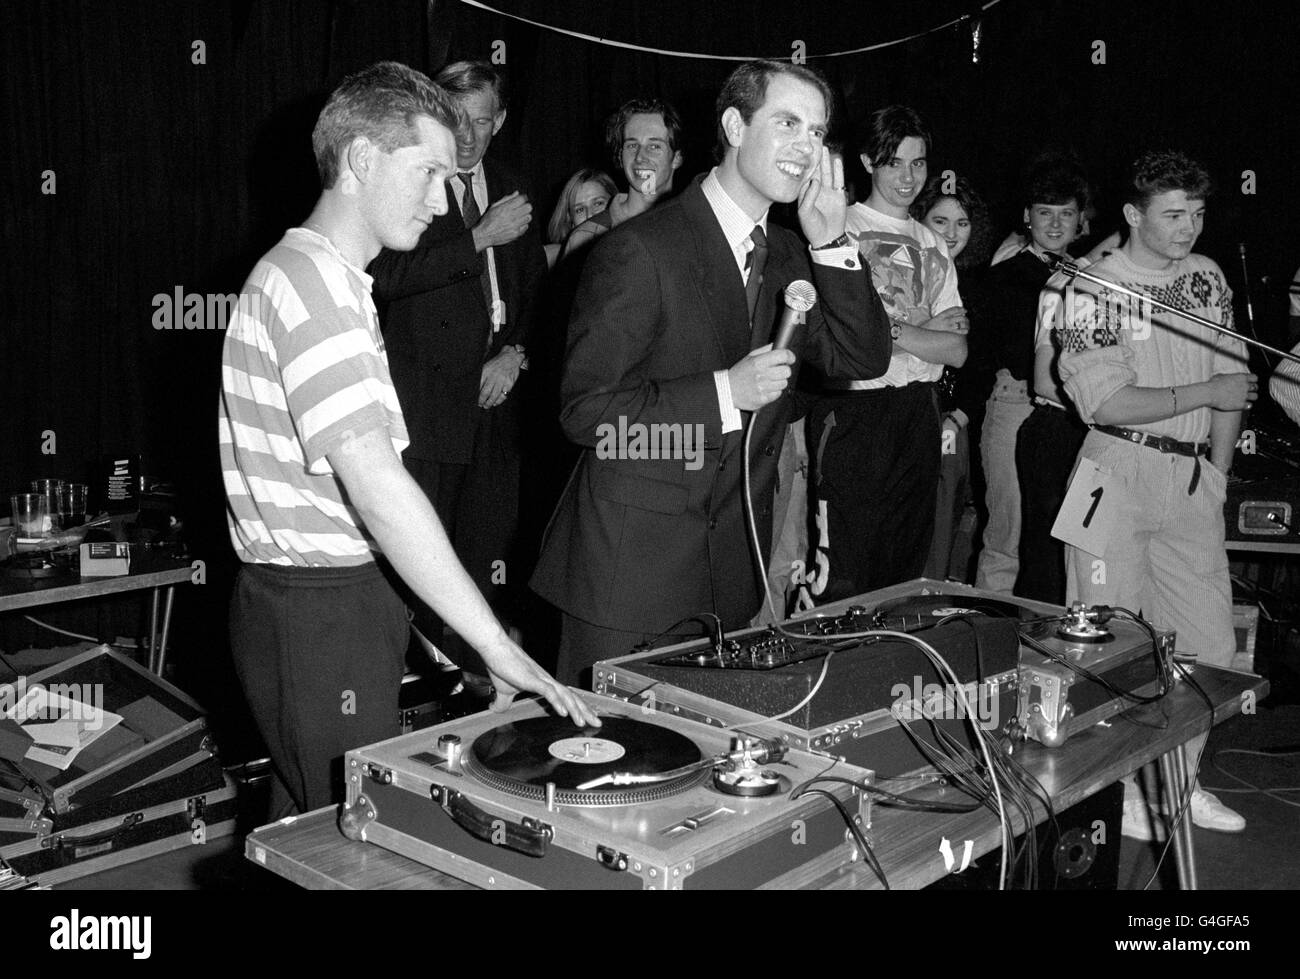 HRH Prince Edward takes over from DJ Andi Bird (left) at a 24 hour sponsored disco dance in Basildon. Monies raised will be shared between local youth group and the duke of Edinburgh's Award special projects committee of which the prince is Chairman. Stock Photo